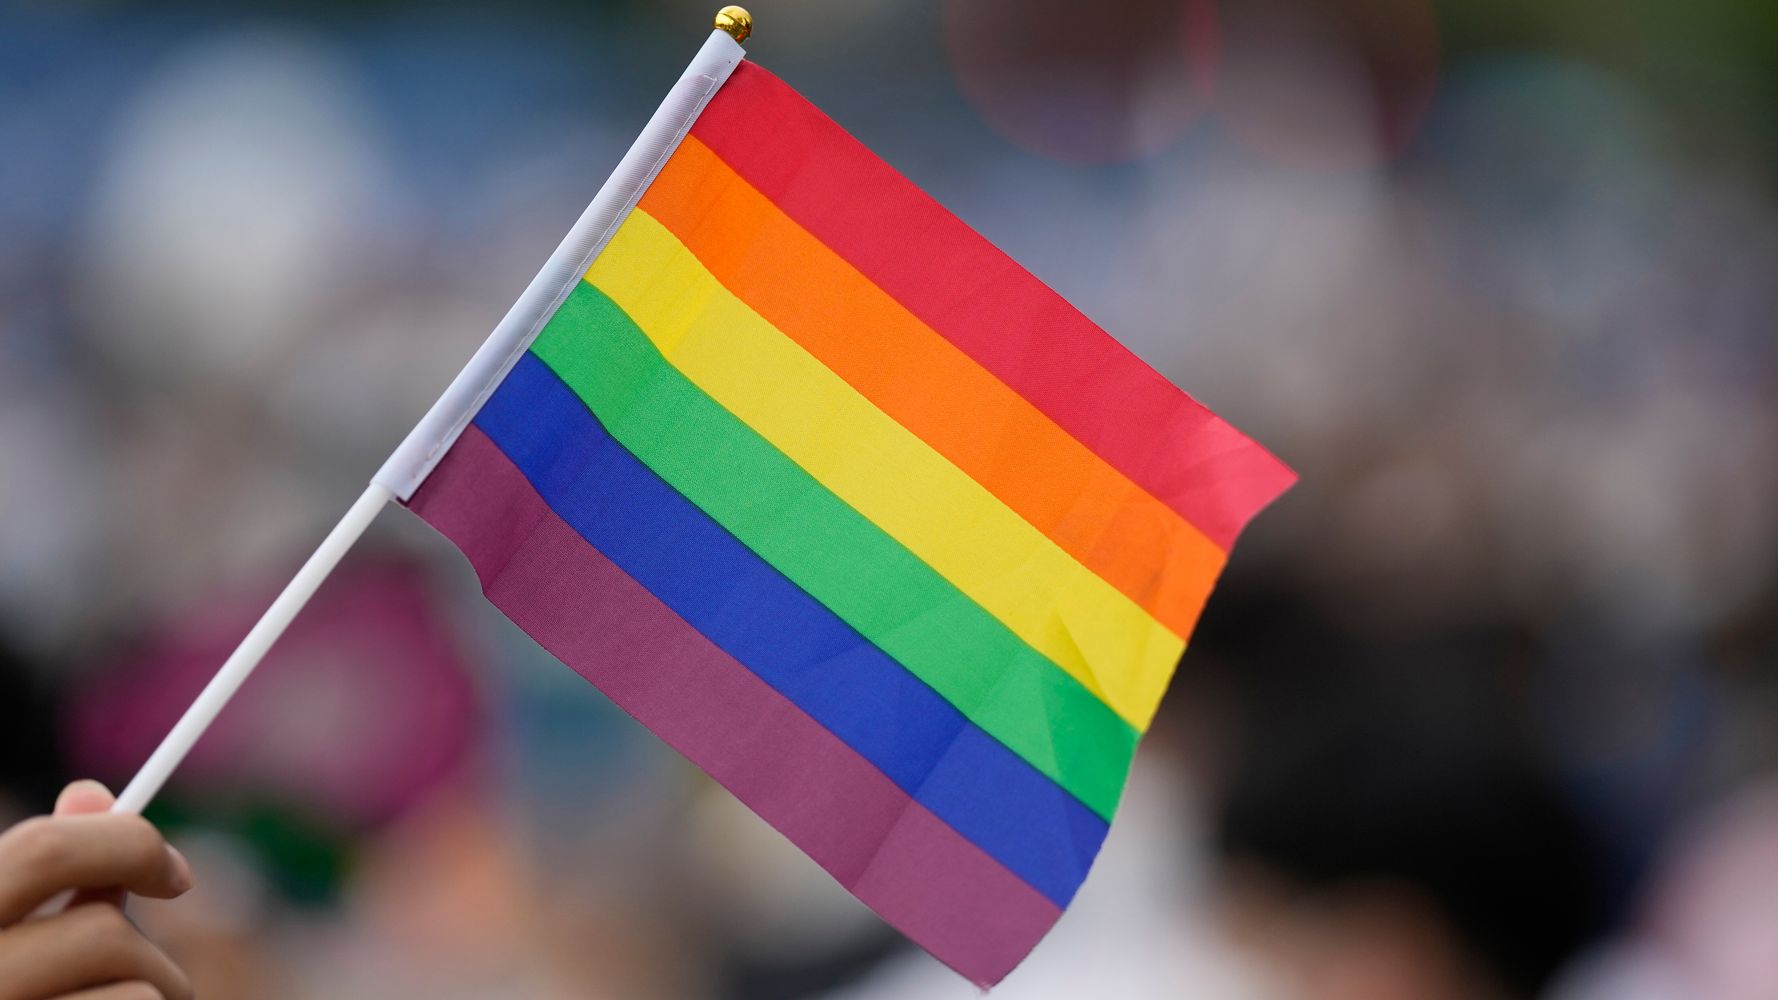 Wisconsin School District Bans Pride Flags In Classrooms, Pronouns In Emails